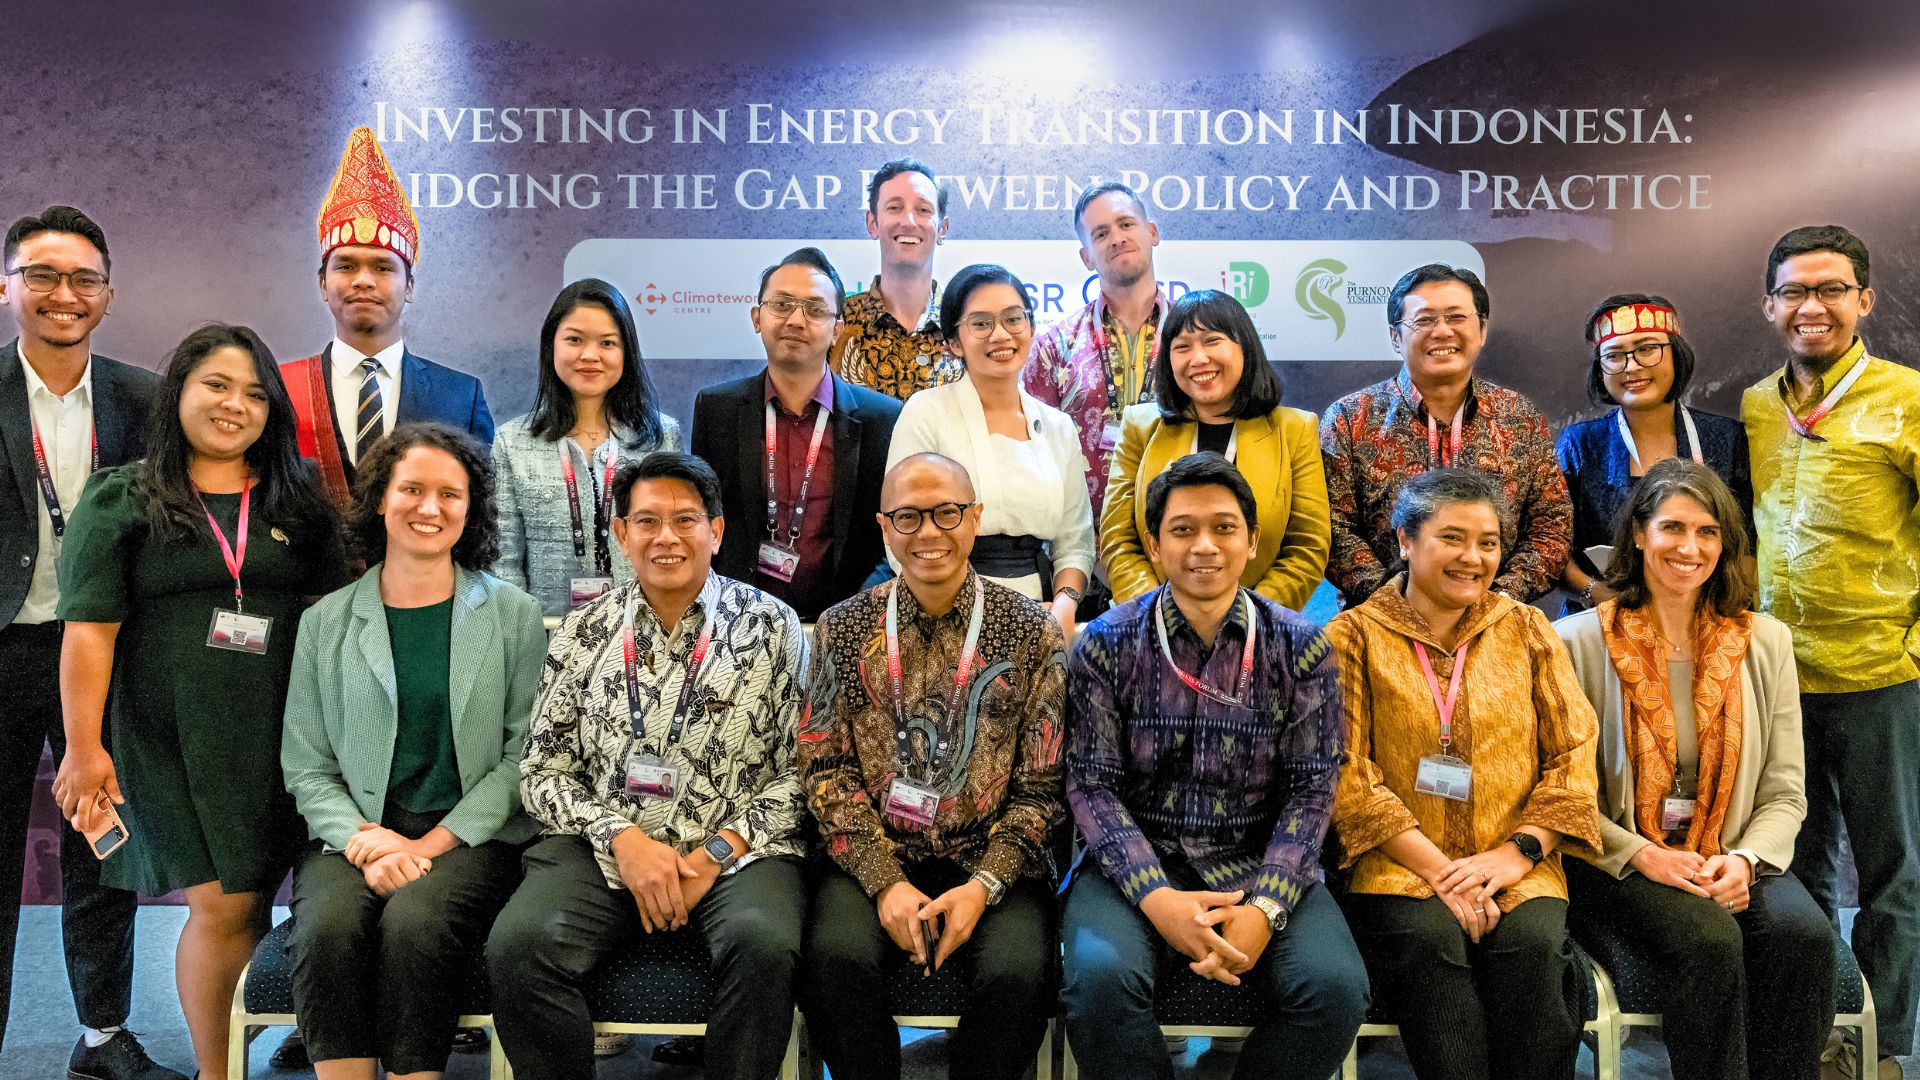 A group photograph of men and women in formal western and Indonesian attire smiling at the camera. Behind them sits a backdrop reading "Investing in Energy Transition in Indonesia: Bridging the gap between Policy and Practice"